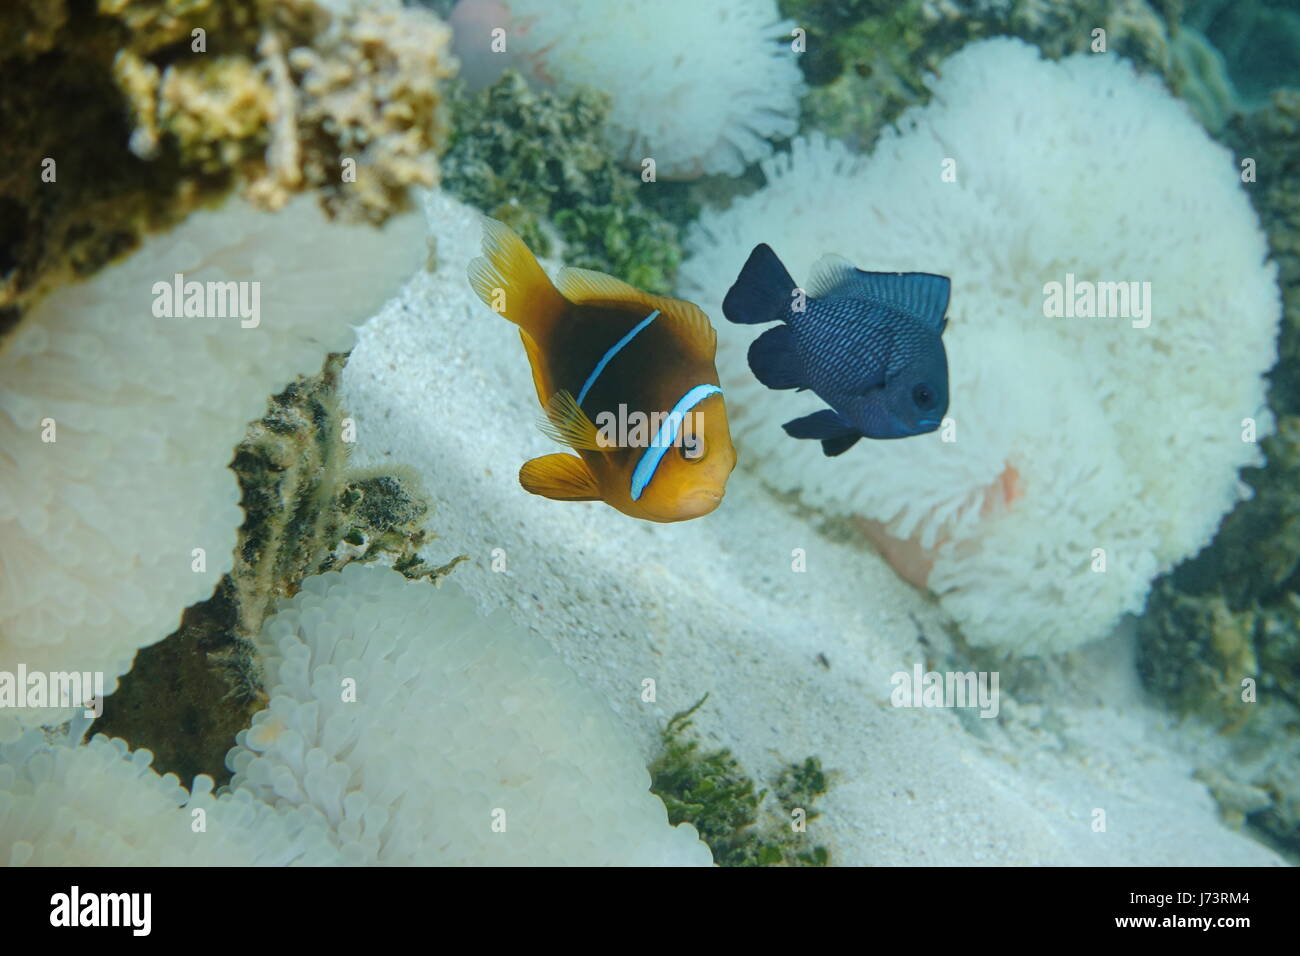 A Tropical fish orange-fin anemonefish, Amphiprion chrysopterus, with a damselfish and sea anemone in background, Pacific ocean, Tahiti, French Polyne Stock Photo